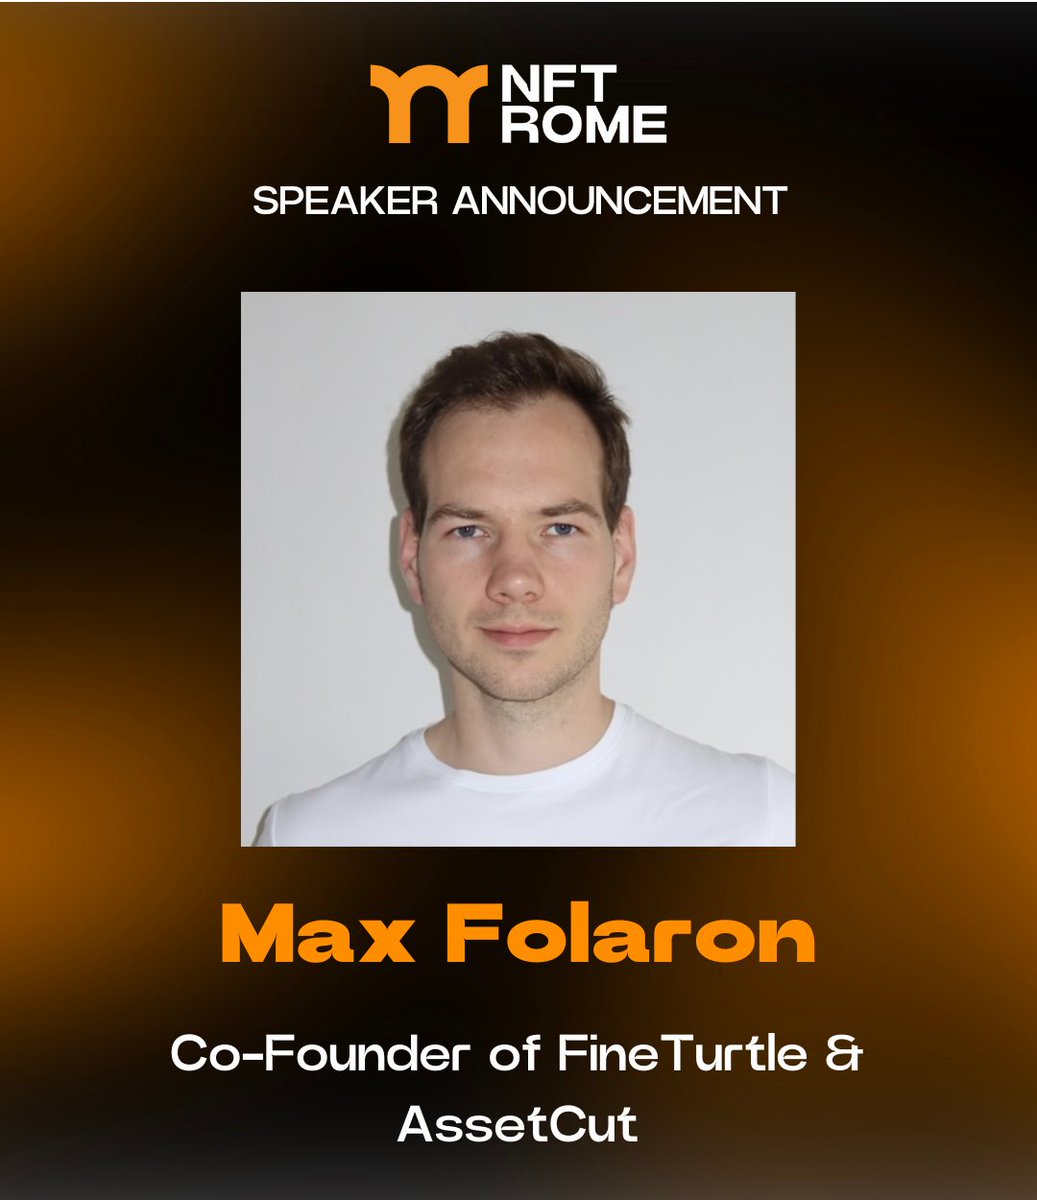 🚨Speaker Announcement 🚨 We are honoured to announce @maxfolaron as a speaker at NFT Rome. 🇮🇹 He is currently developing @FineTurtleNFT, a project that integrates NFTs with real-world assets, and @Assetcut, an asset tokenization platform & marketplace in B2B and B2C segments.